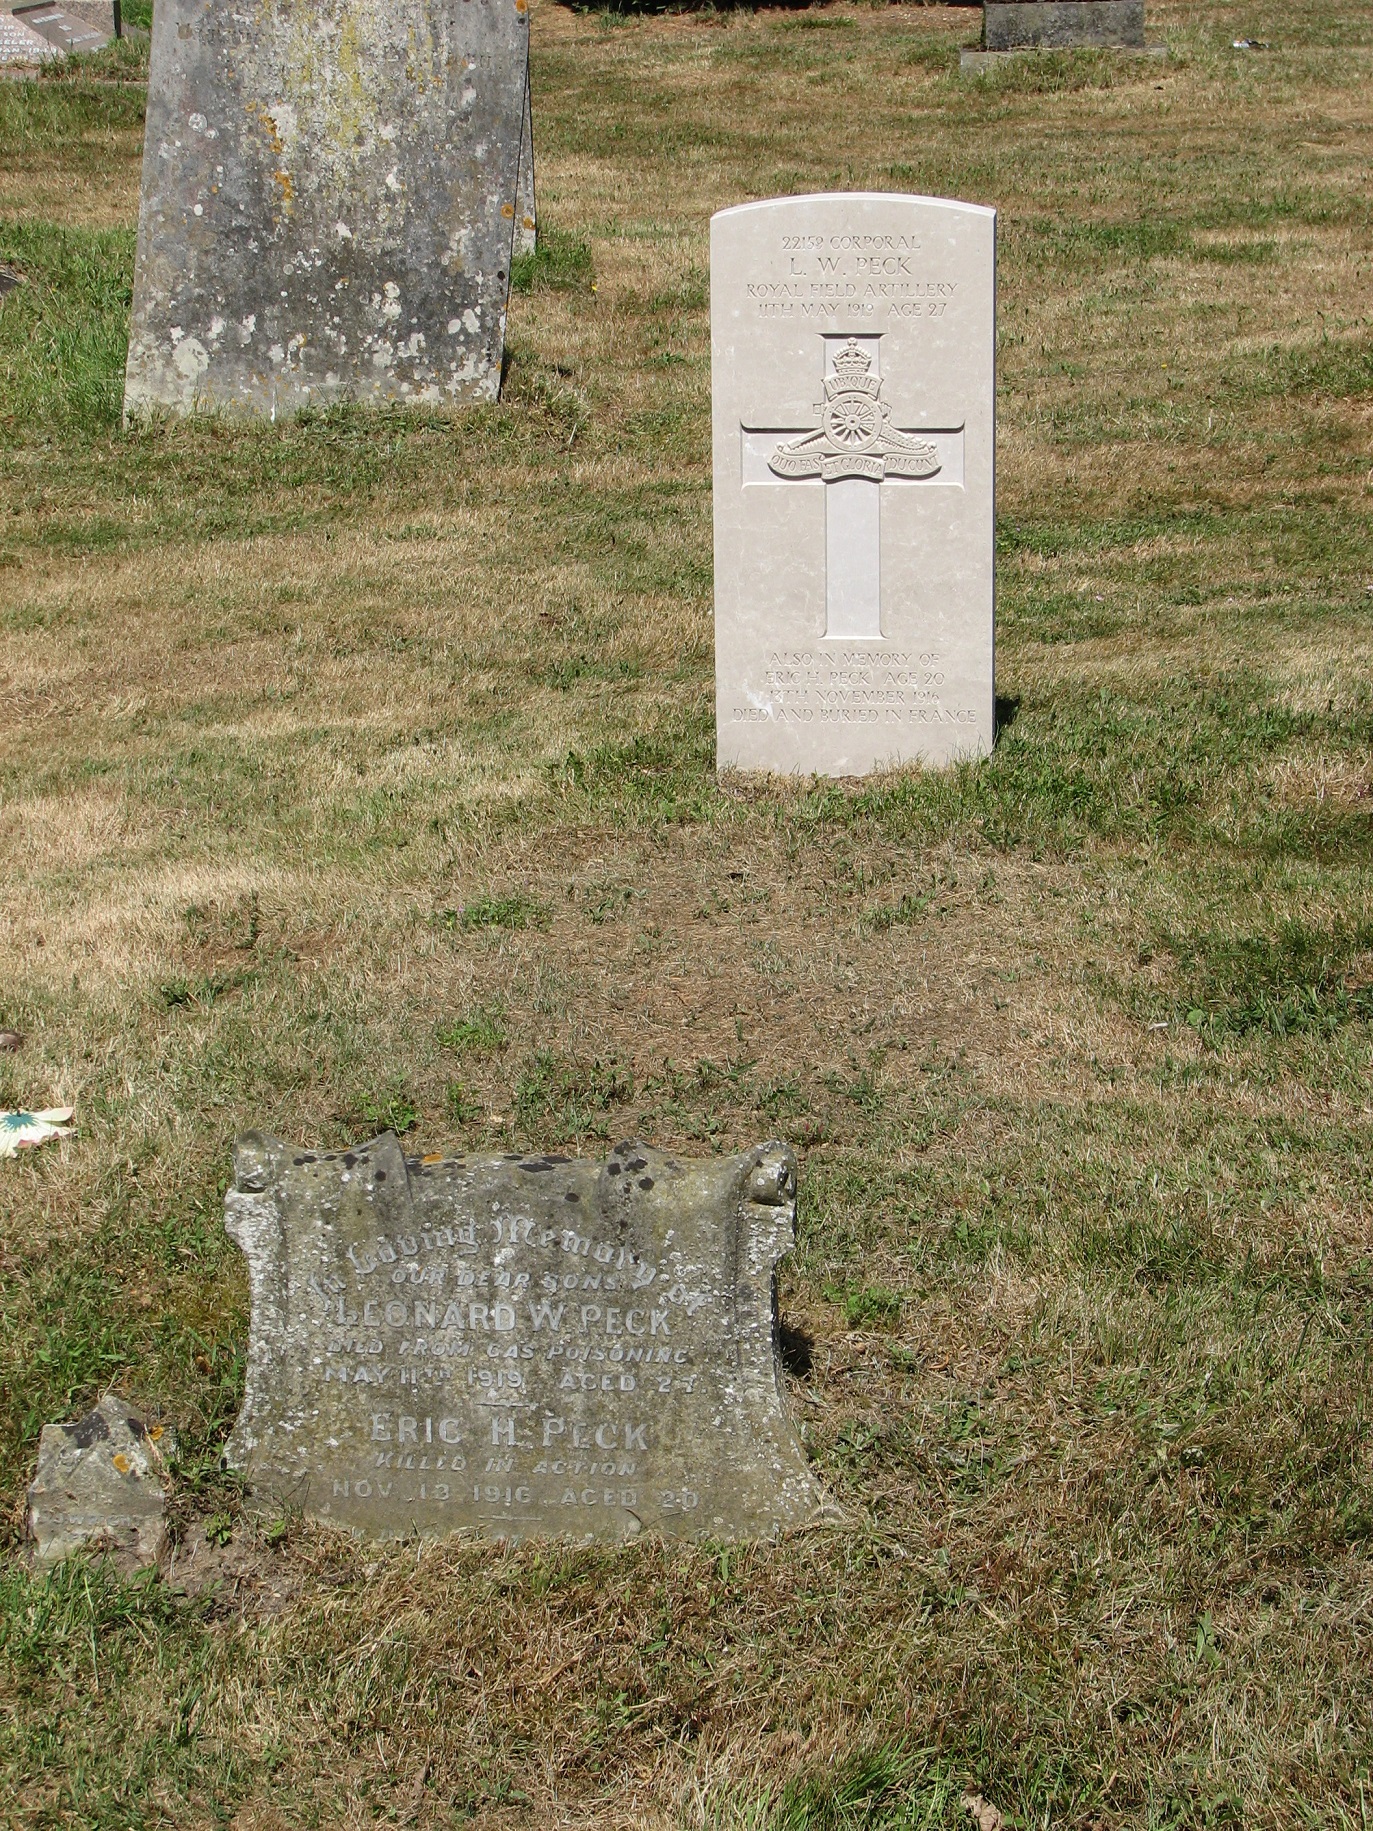 Leonard's grave in East Bergholt Cemetery<br>Showing the "new" (Commonwealth War Graves Commission) headstone and - at the foot of Leonard's grave - the original headstone that had been erected by his family.<br />MA